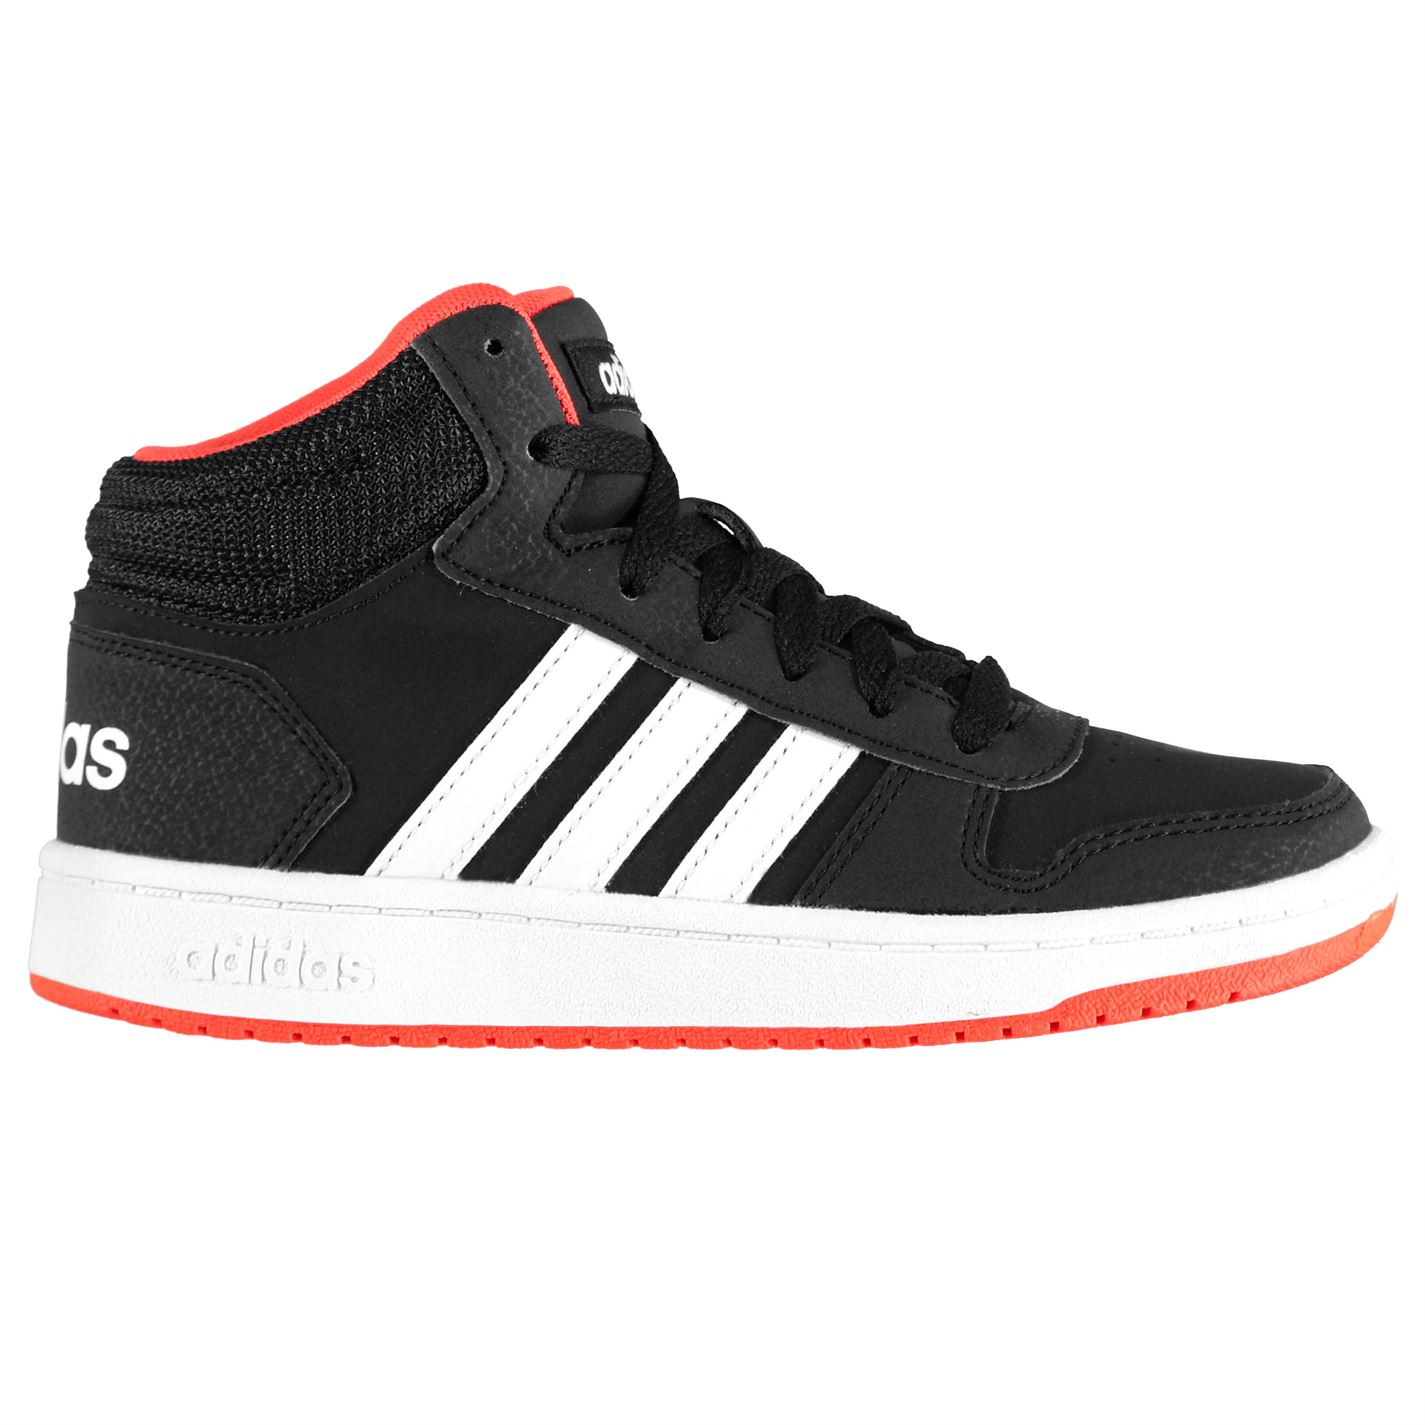 Adidas Hoops Mid 2.0 Trainers Child Boys